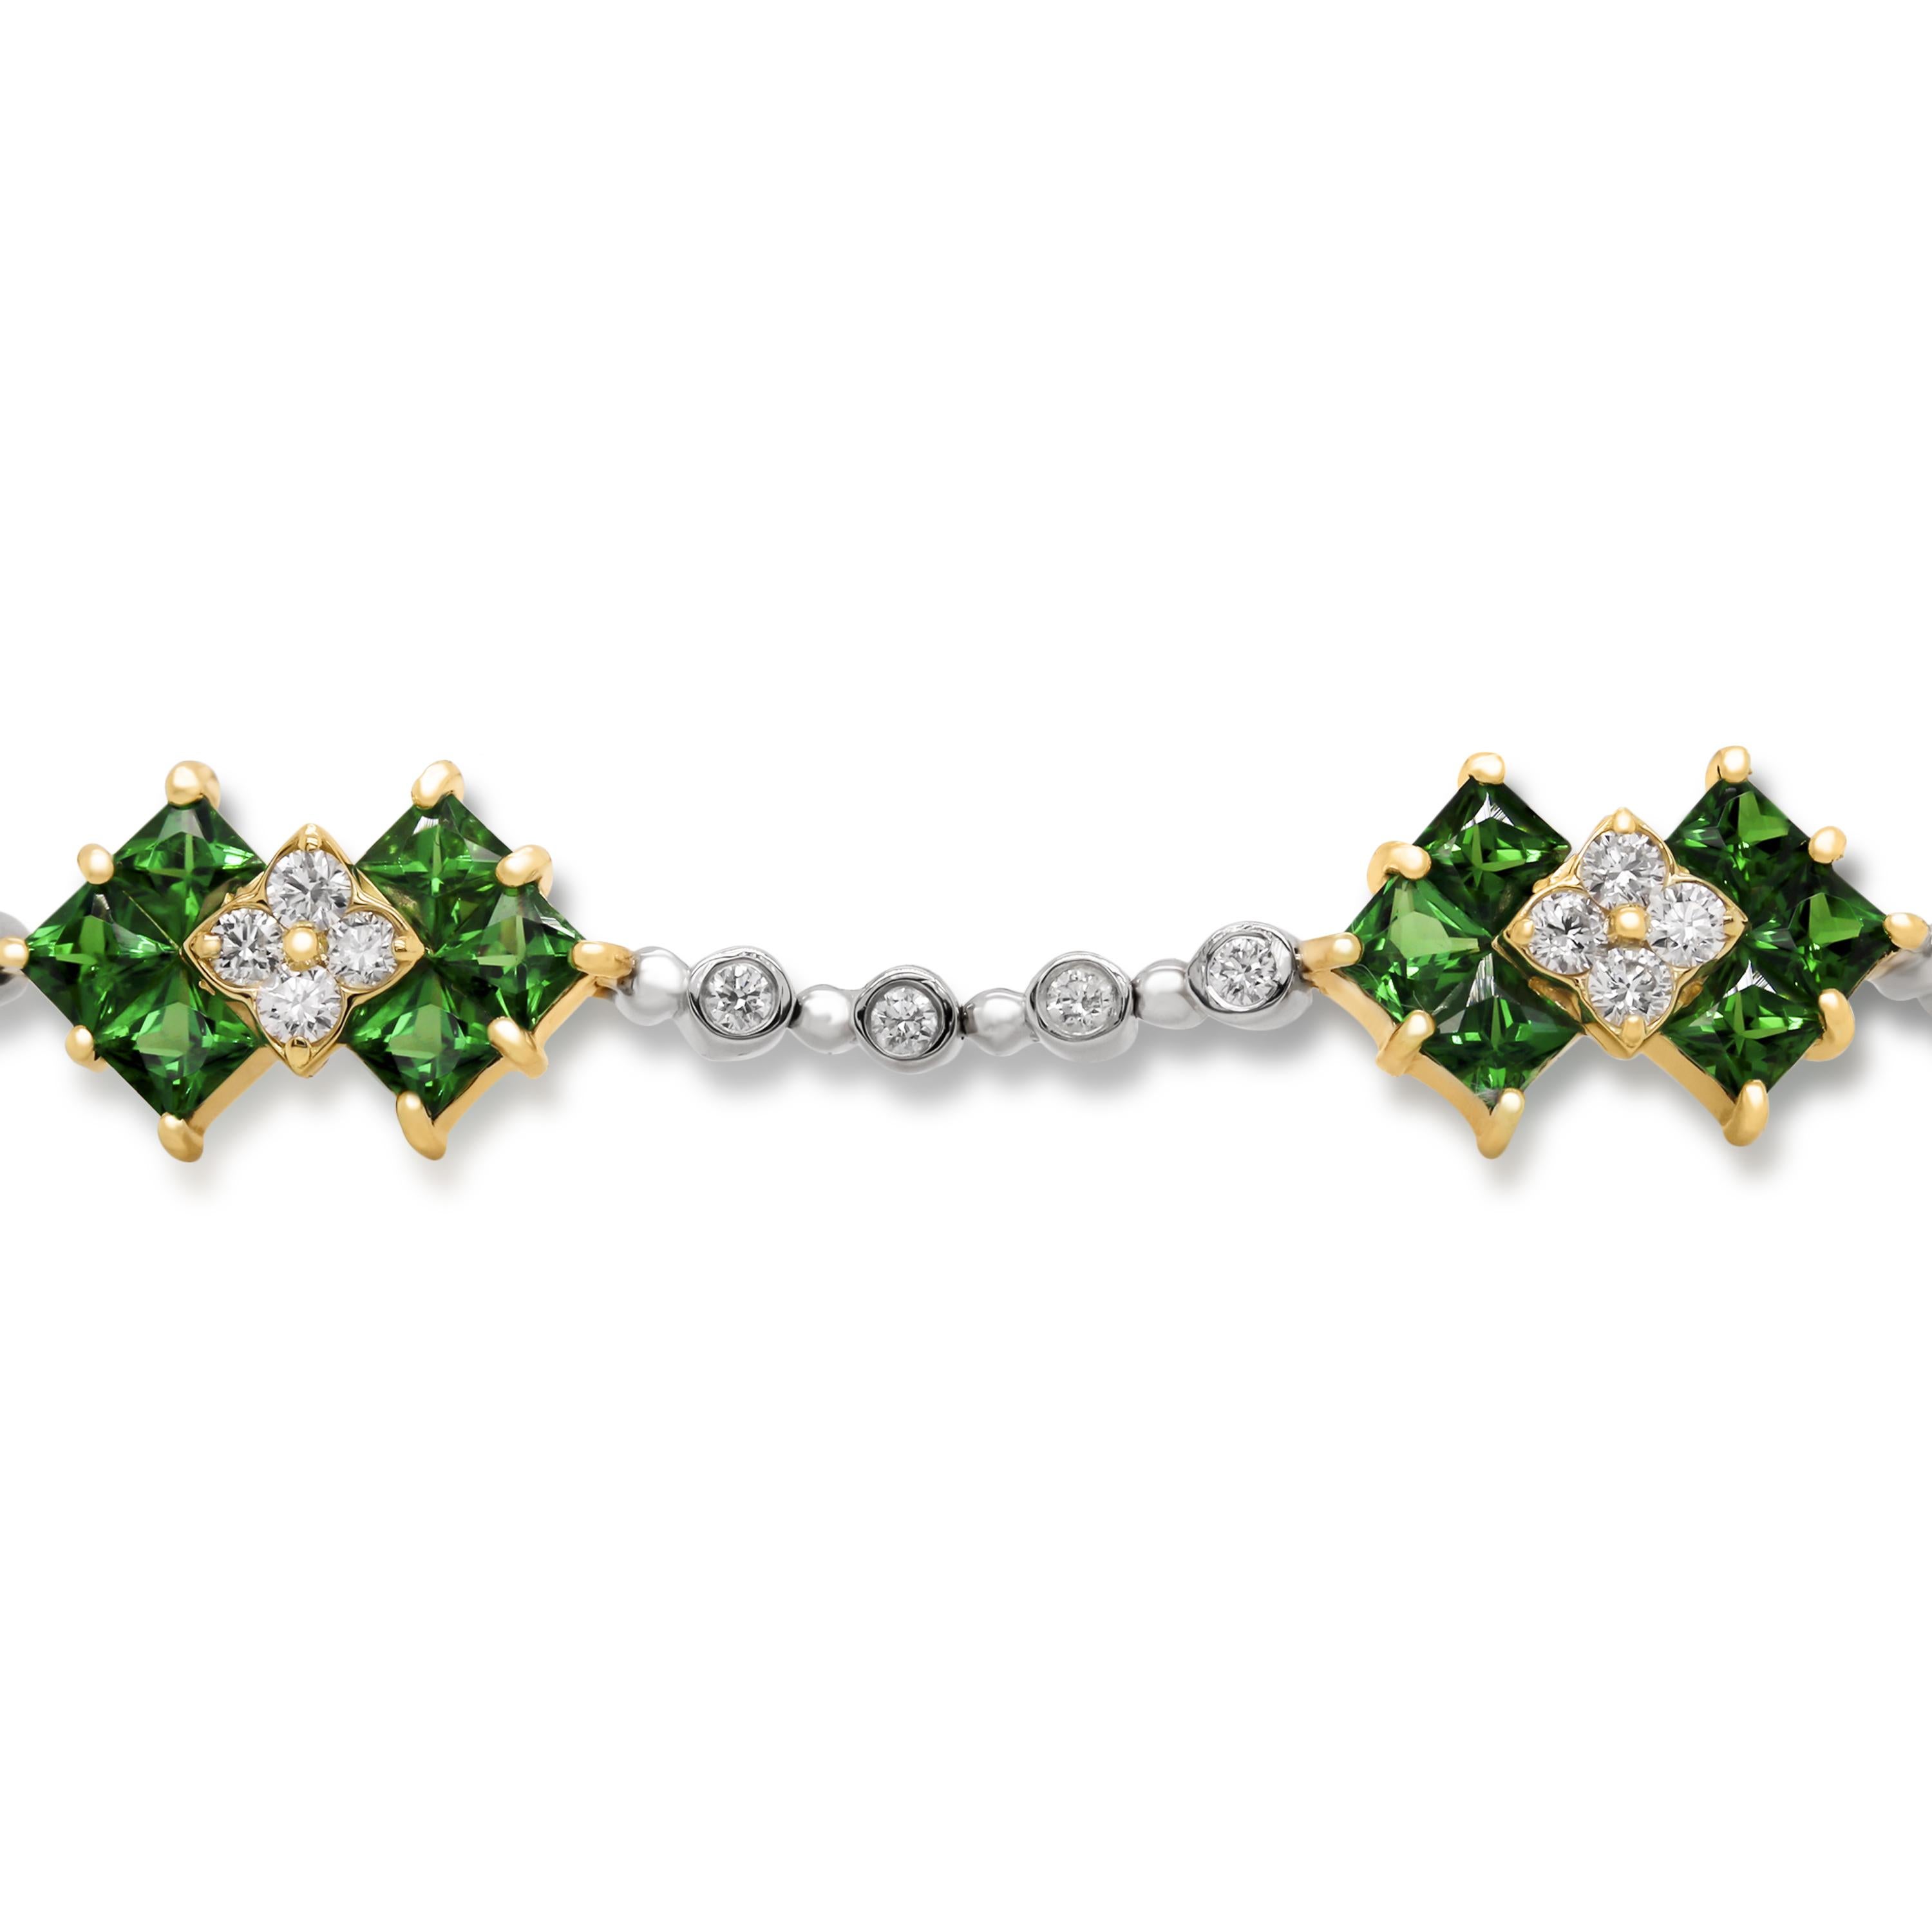 Stambolian 18K White Yellow Gold Diamond Princess Cut Tsavorite Tennis Bracelet

This state of the art bracelet by Stambolian is created in solid 18k white gold with diamonds and tsavorites. The princess-cut tsavorites are set in solid 18k yellow